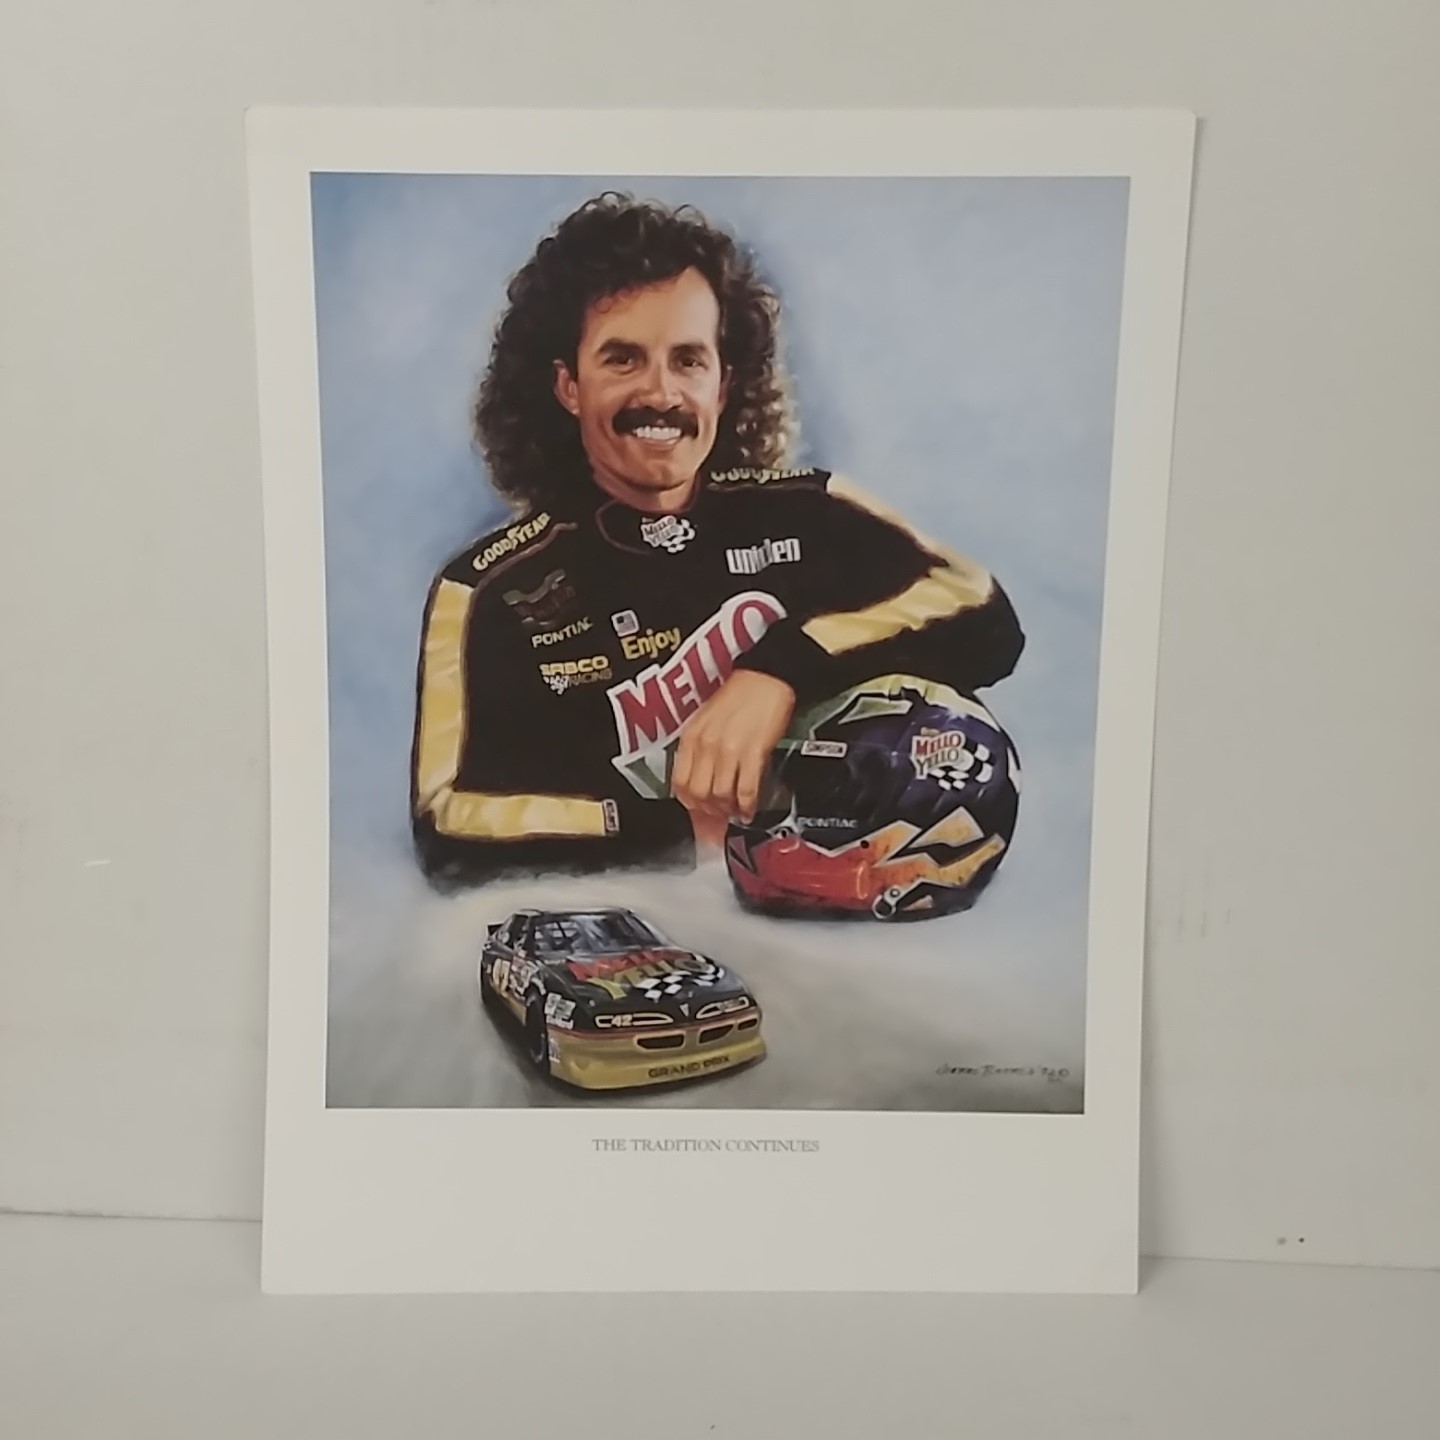 1992 Kyle Petty Mellow Yellow "The Tradition Continues" print by Jeanne Barnes